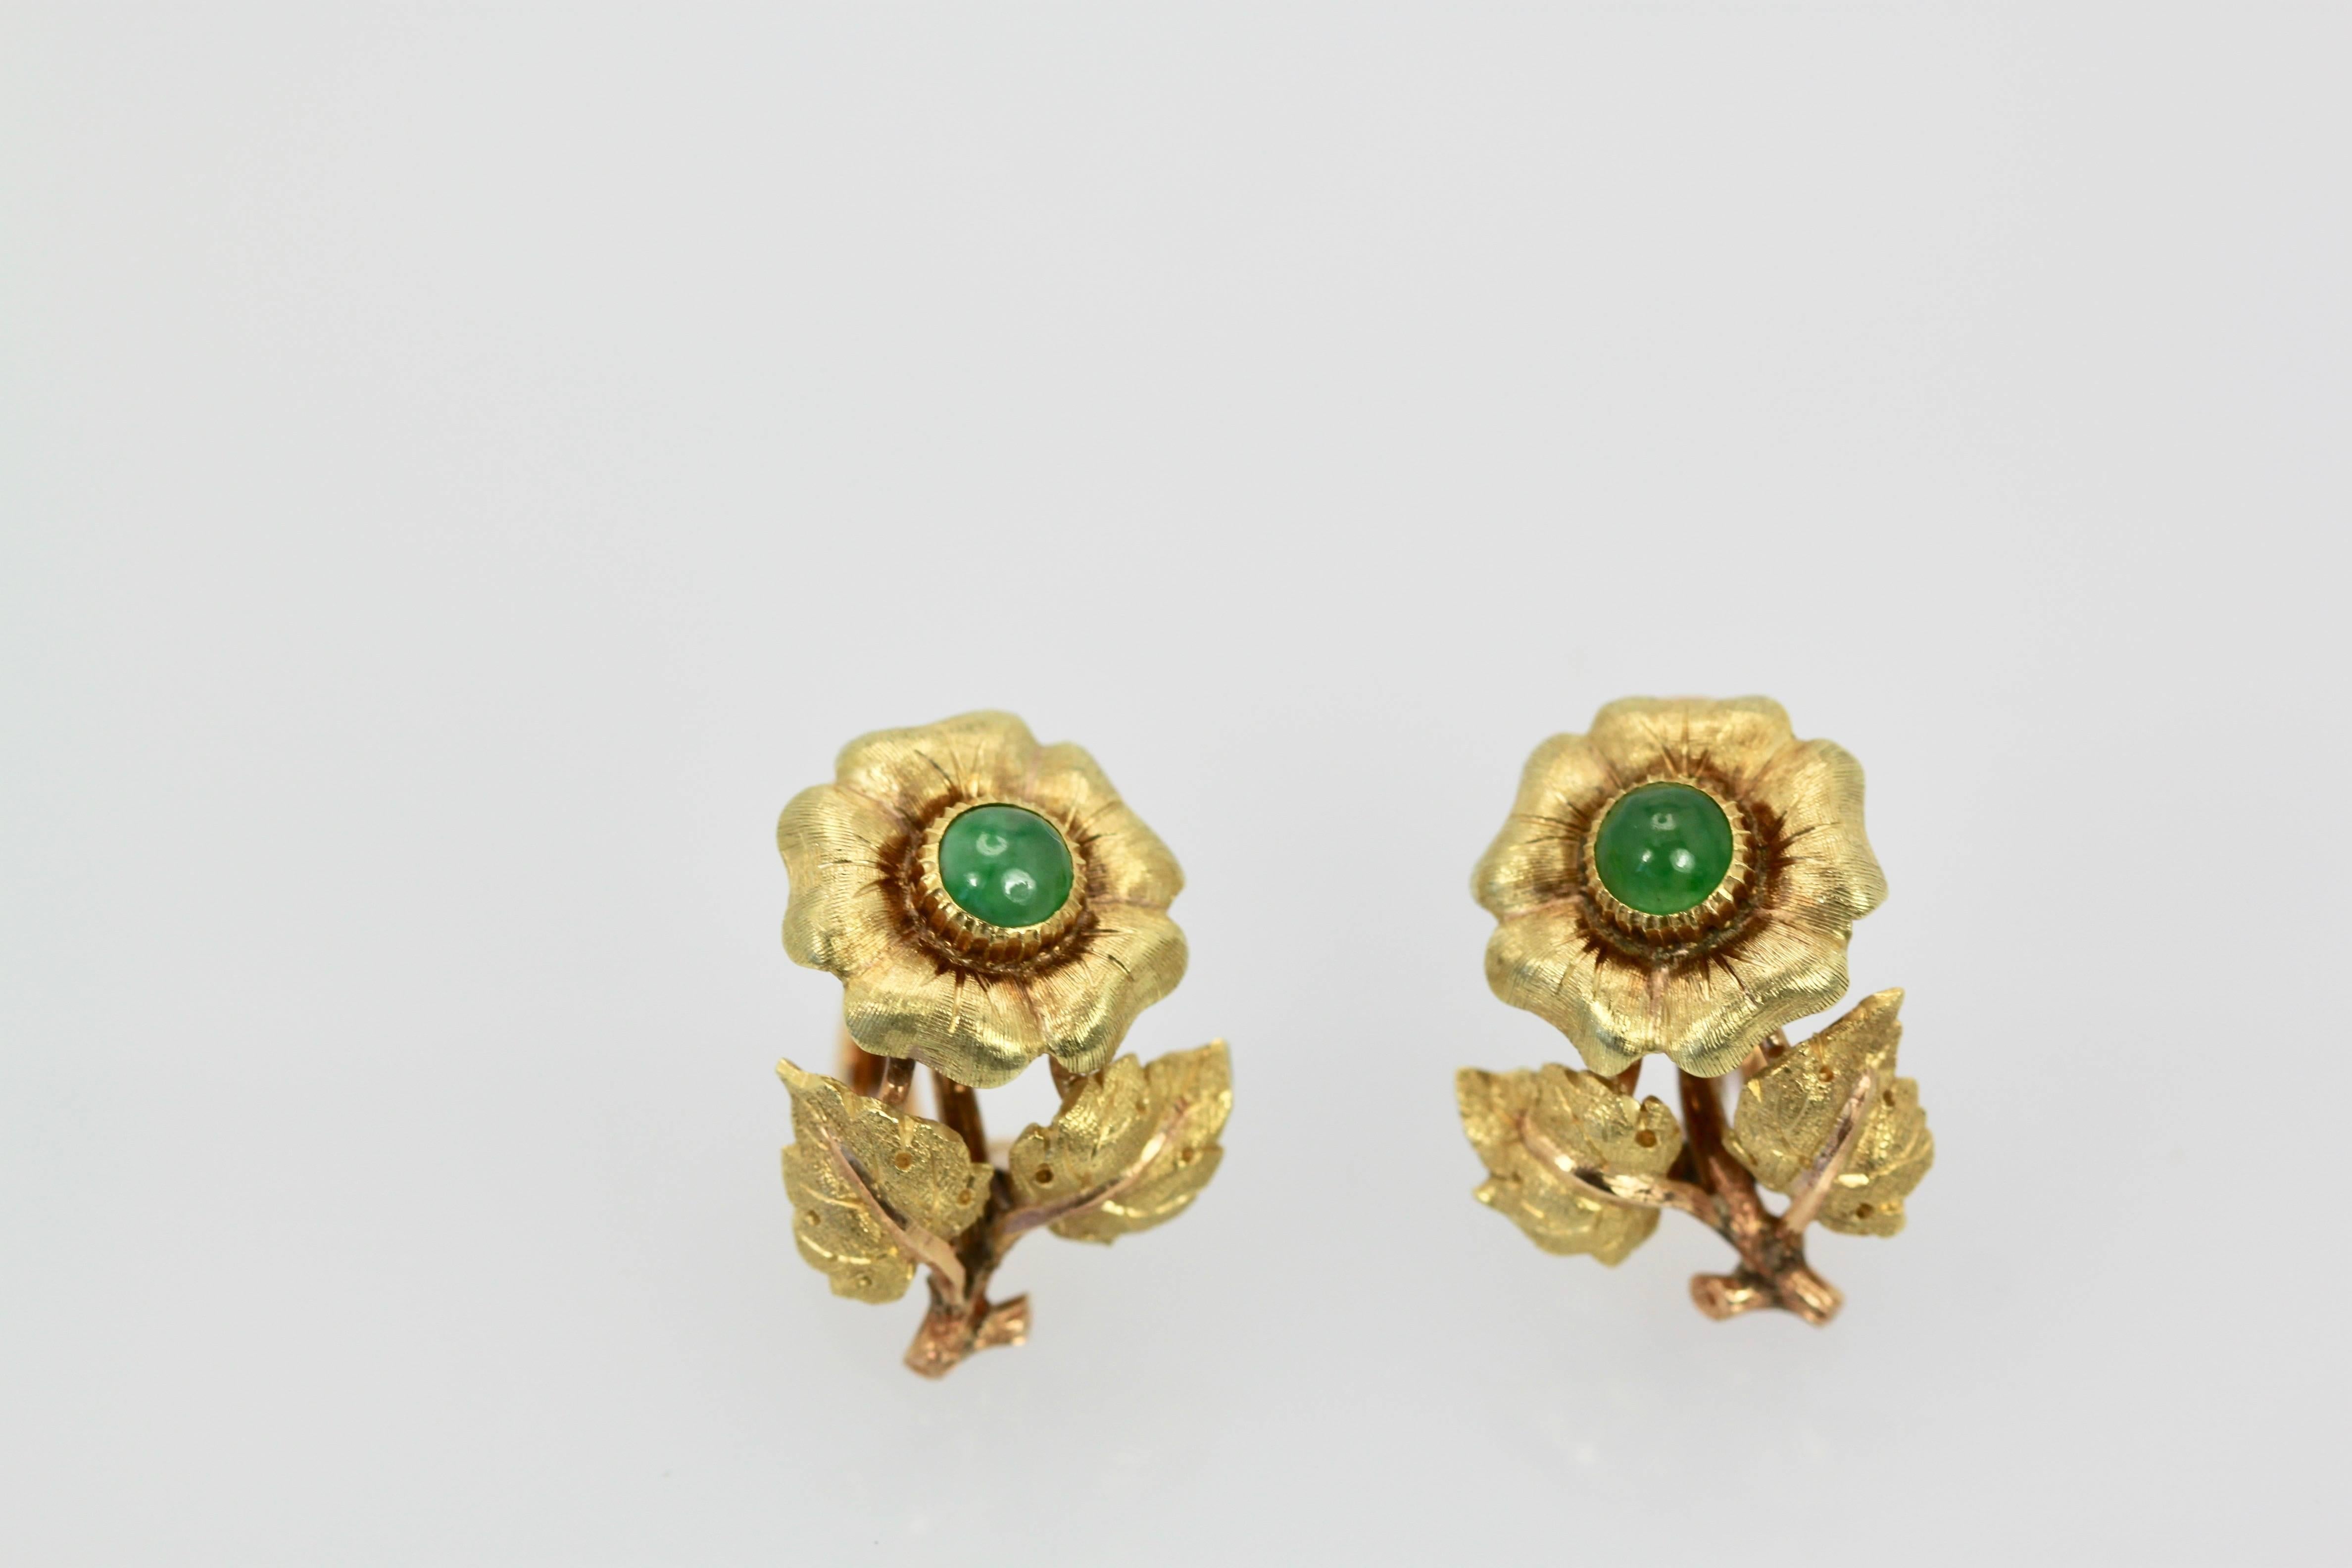 These earrings were made by Mario Buccellati as marked on the piece.  These are from the 1960's and are in excellent shape.  These earrings are set with cabochon Jade stones at approximately 0.50 carats each in the center of the flower.  This has